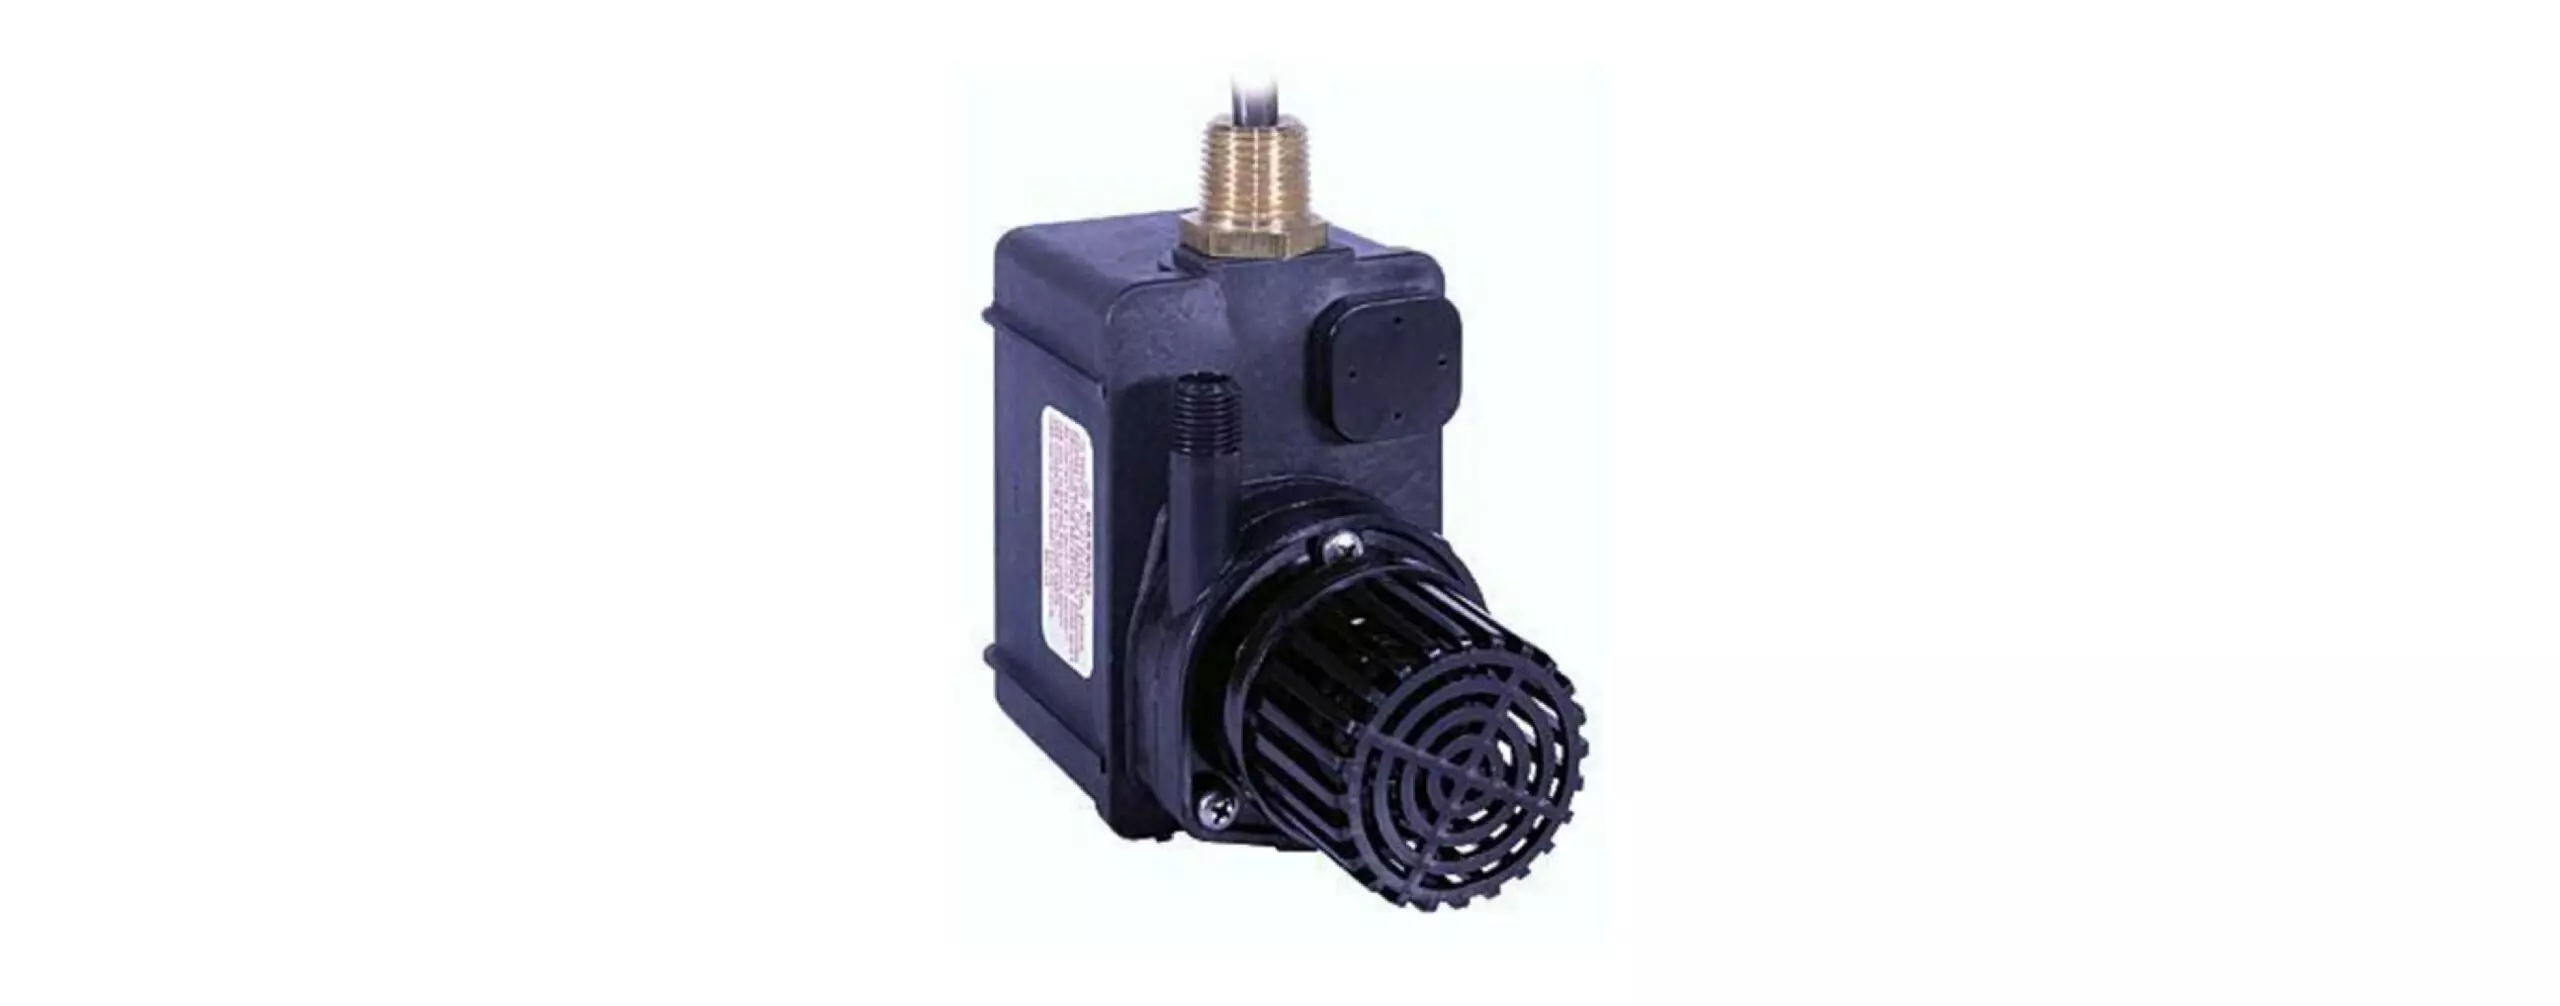 Little Giant Submersible Parts Washer Pump